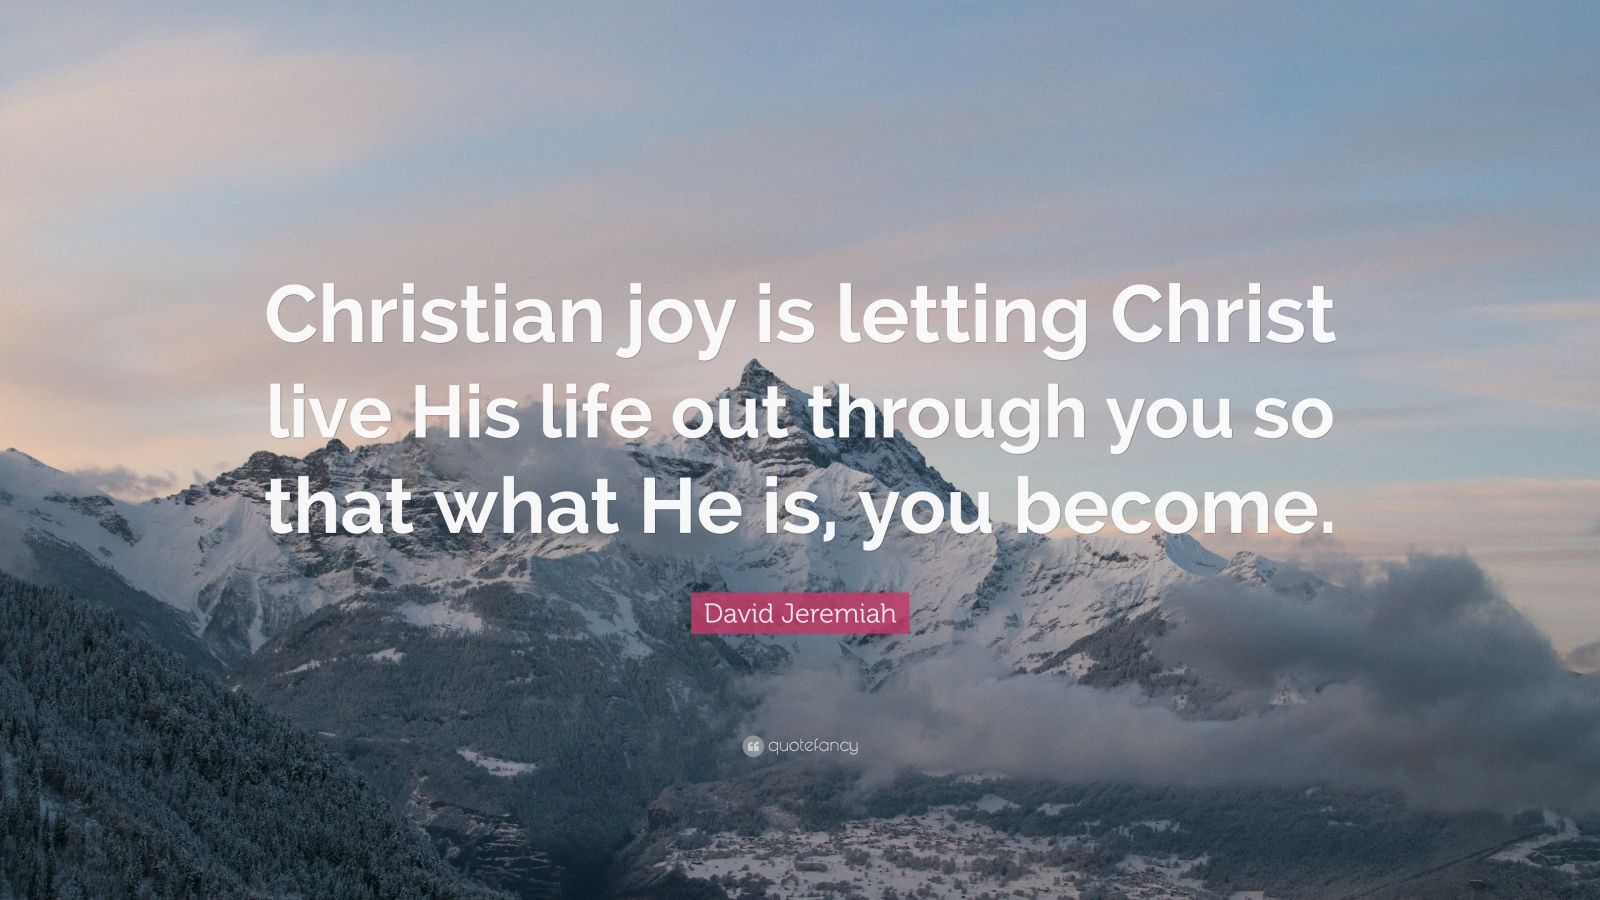 David Jeremiah Quote “Christian joy is letting Christ live His life